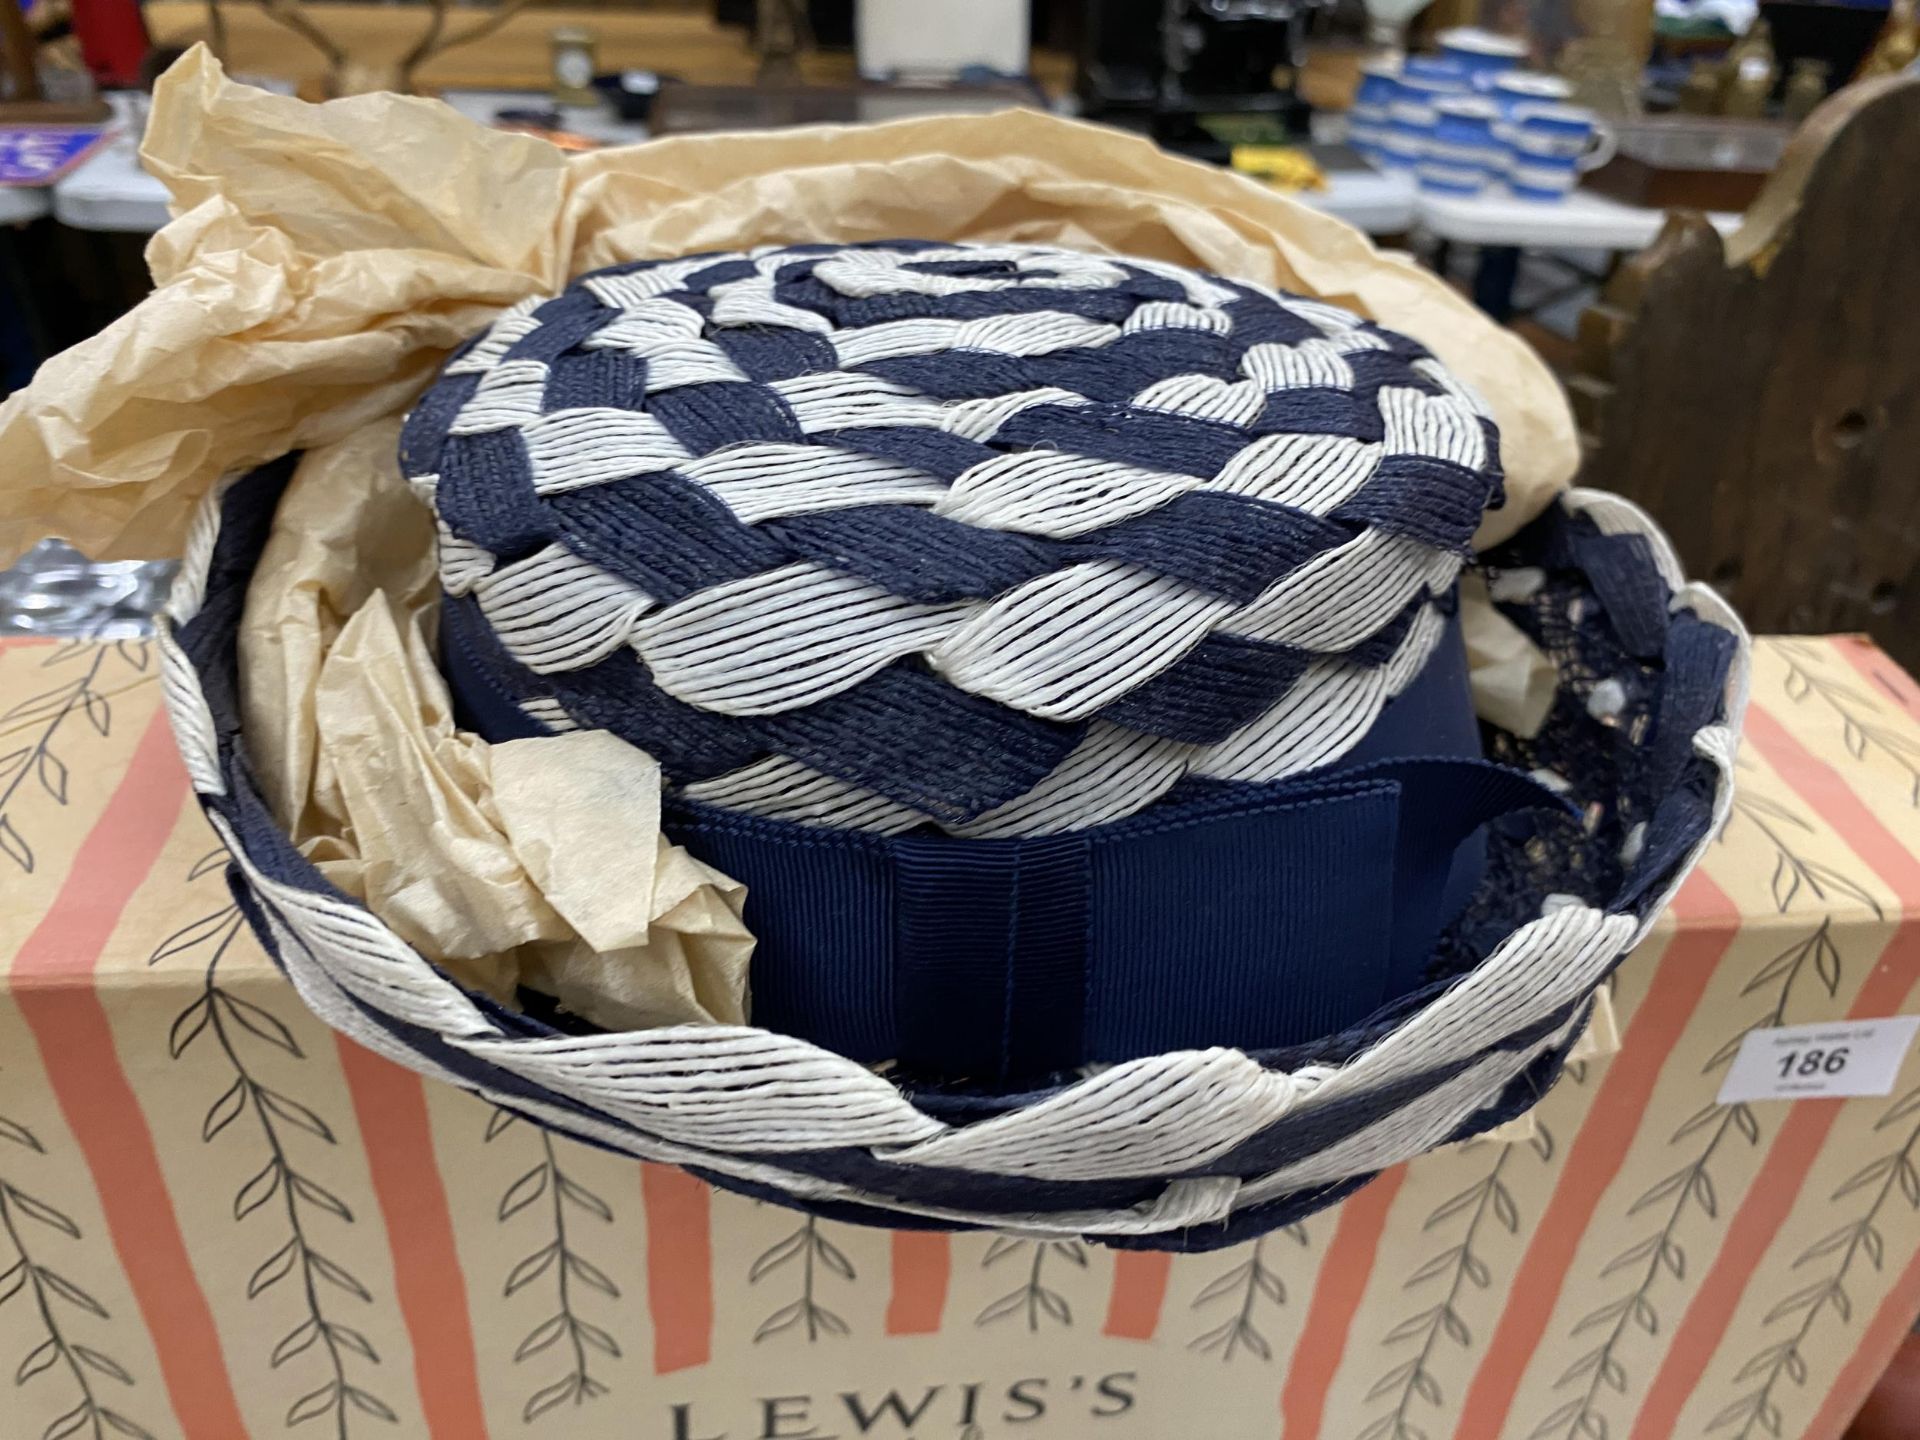 A 1950'S CHARTER HAT IN A VINTAGE LEWIS'S BOX - Image 2 of 3